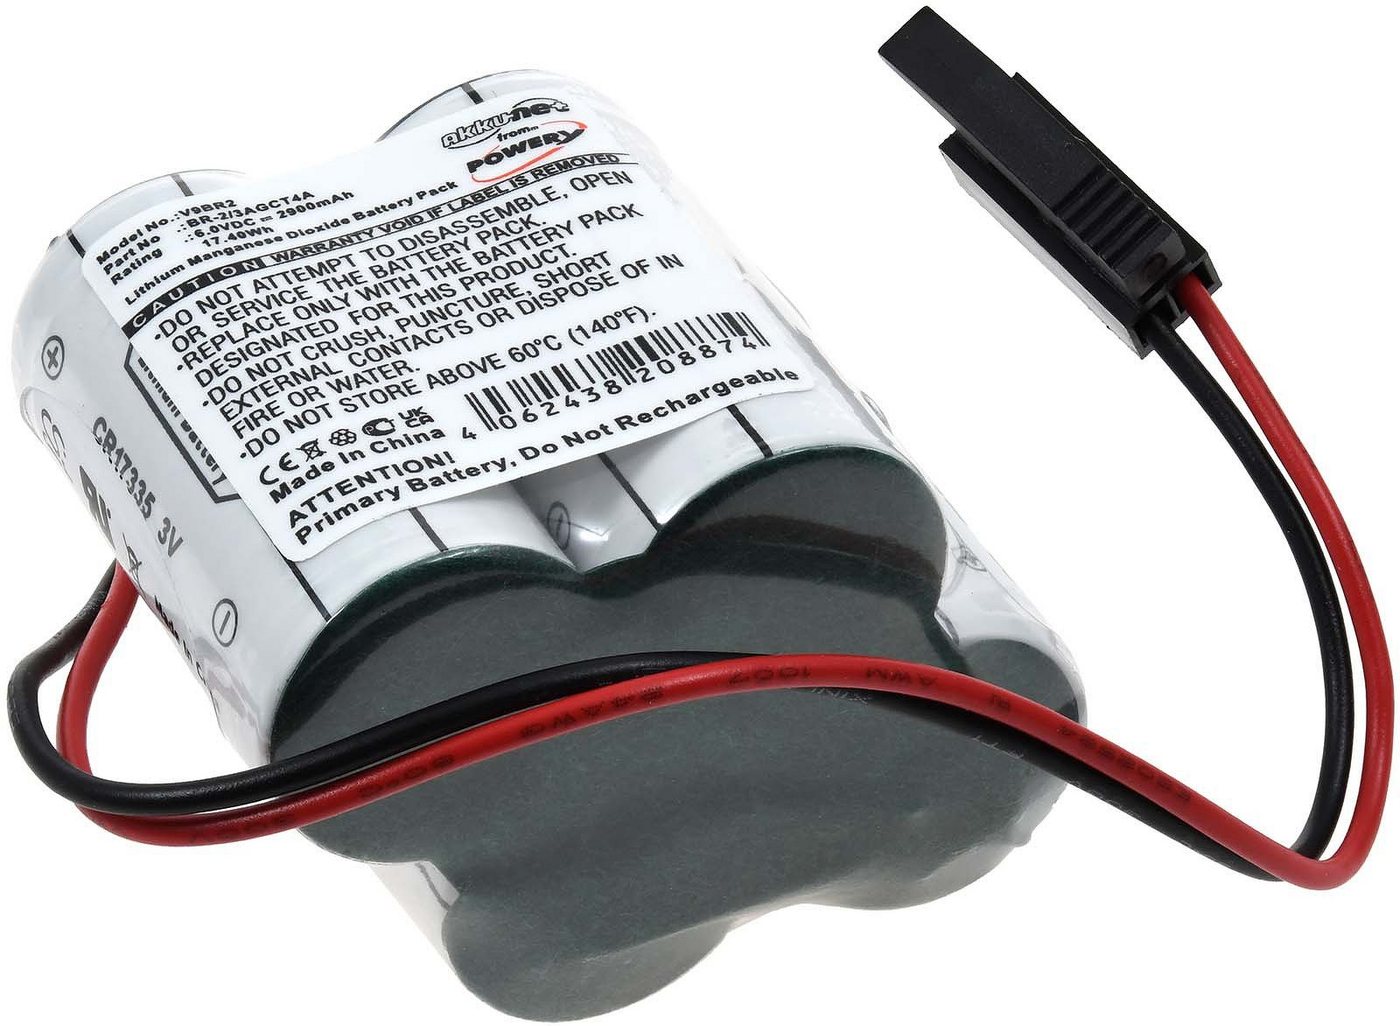 Powery SPS-Lithiumbatterie kompatibel mit Panasonic Typ BR-2/3AGCT4A Batterie, (6 V) von Powery